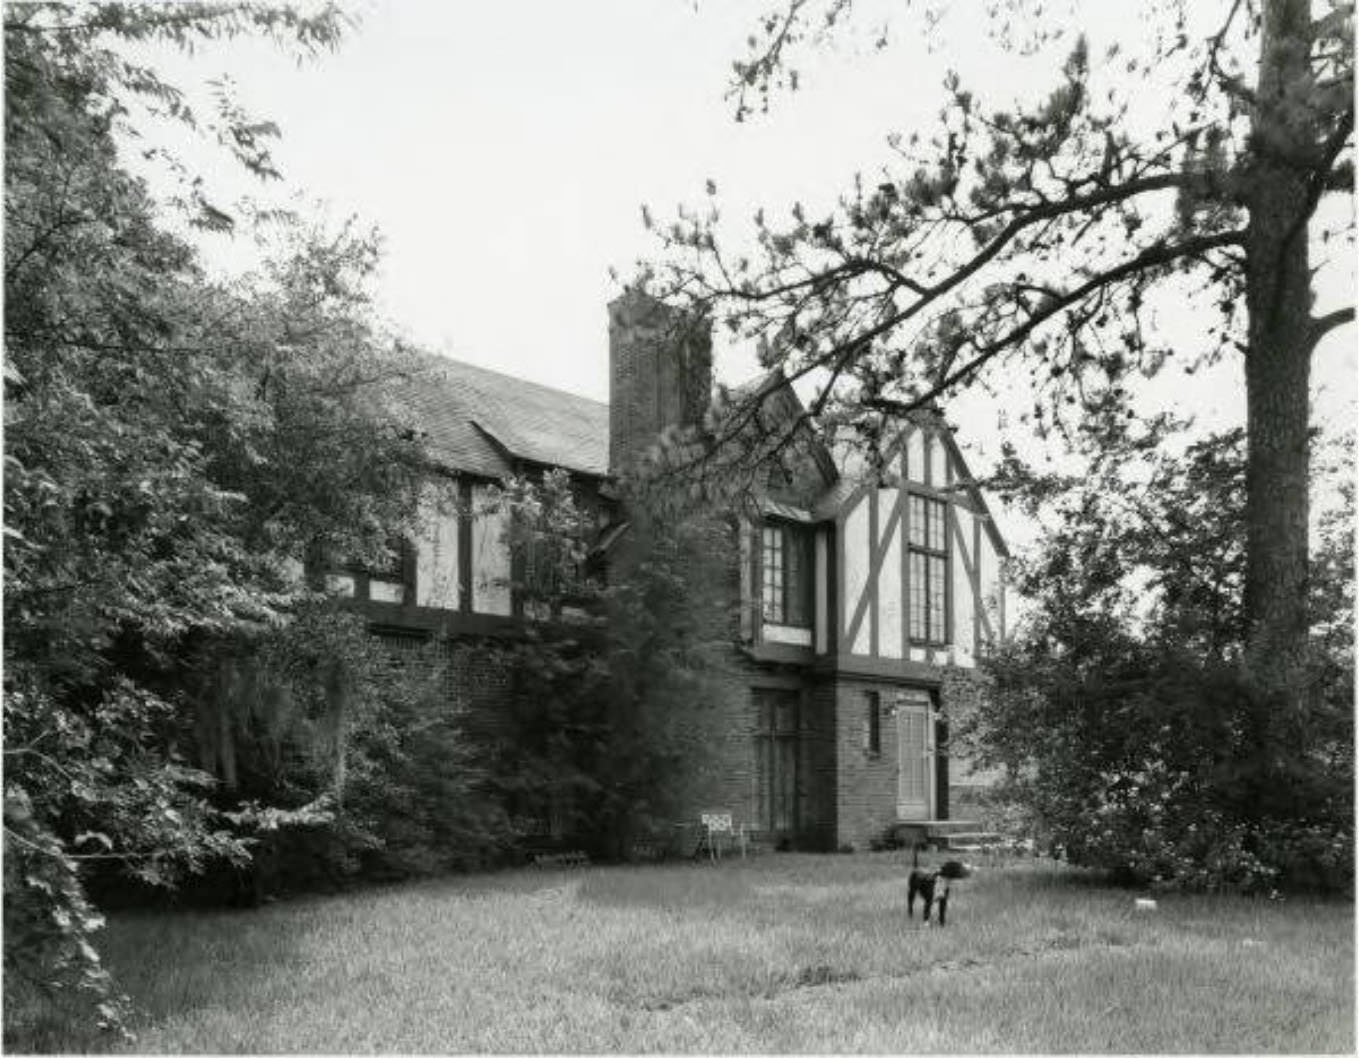 House of Katherine B. And Harry L. Mott, 1930s.